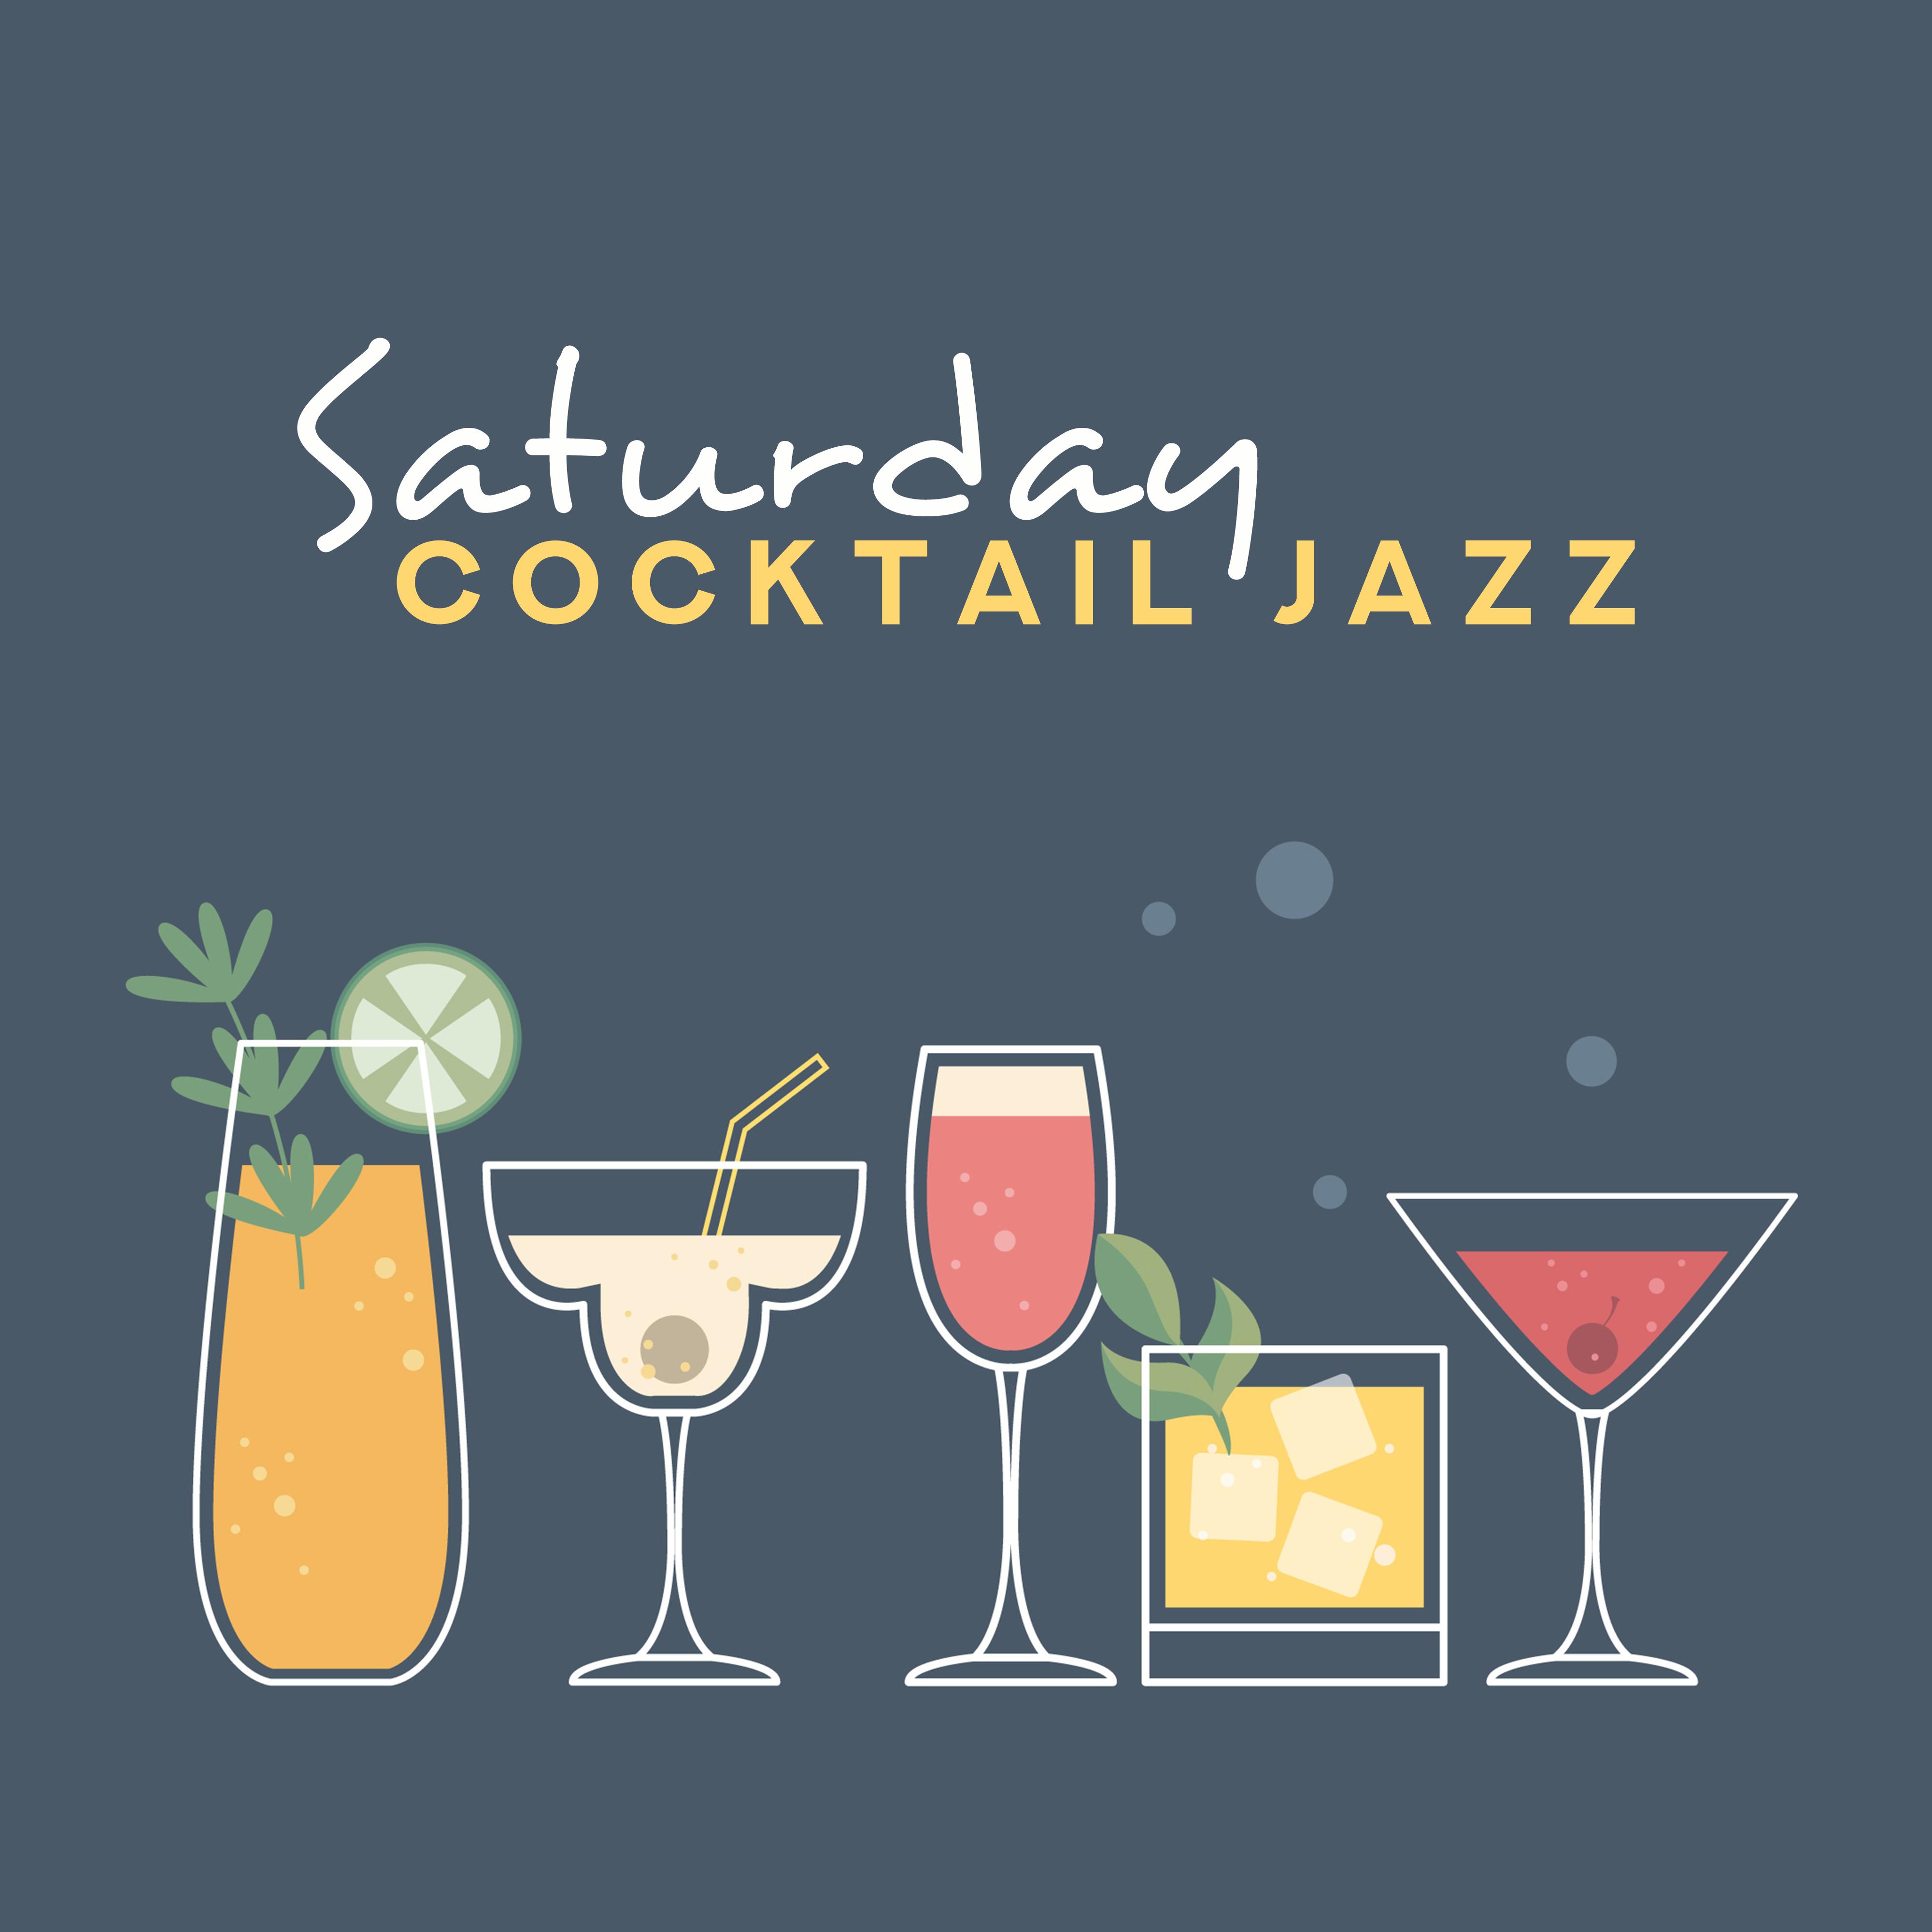 Saturday Cocktail Jazz  Smooth Jazz for Relaxation, Party Jazz, Cocktail Music, Jazz Music Ambient,  Vibes